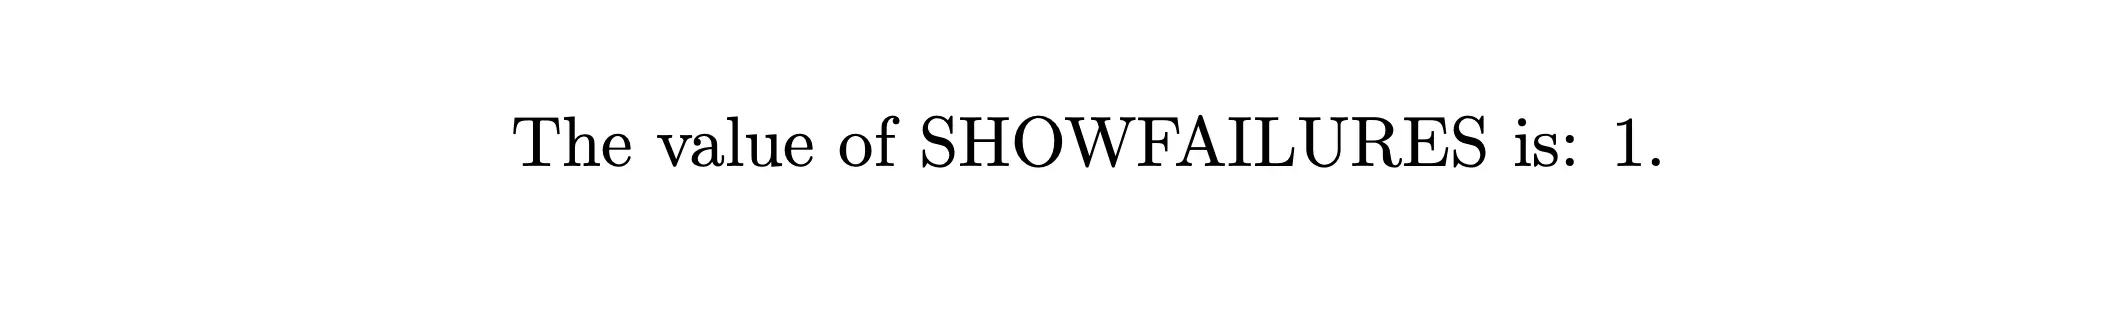 A screenshot of a simple LaTeX document where SHOWFAILURES is correctly set to 1